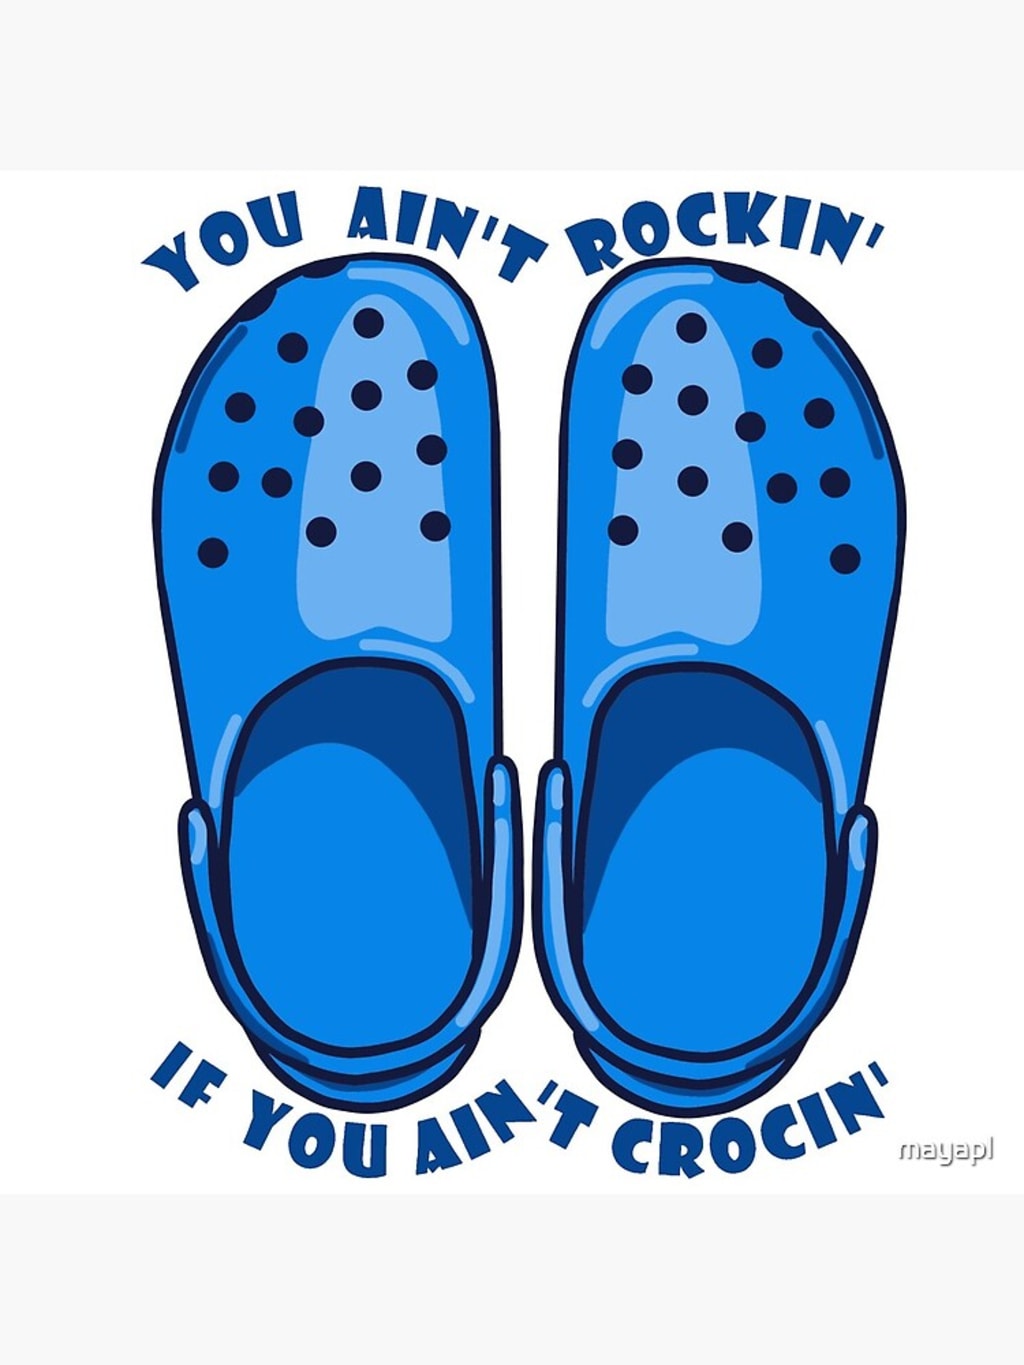 Why are CROCS trending? Styled